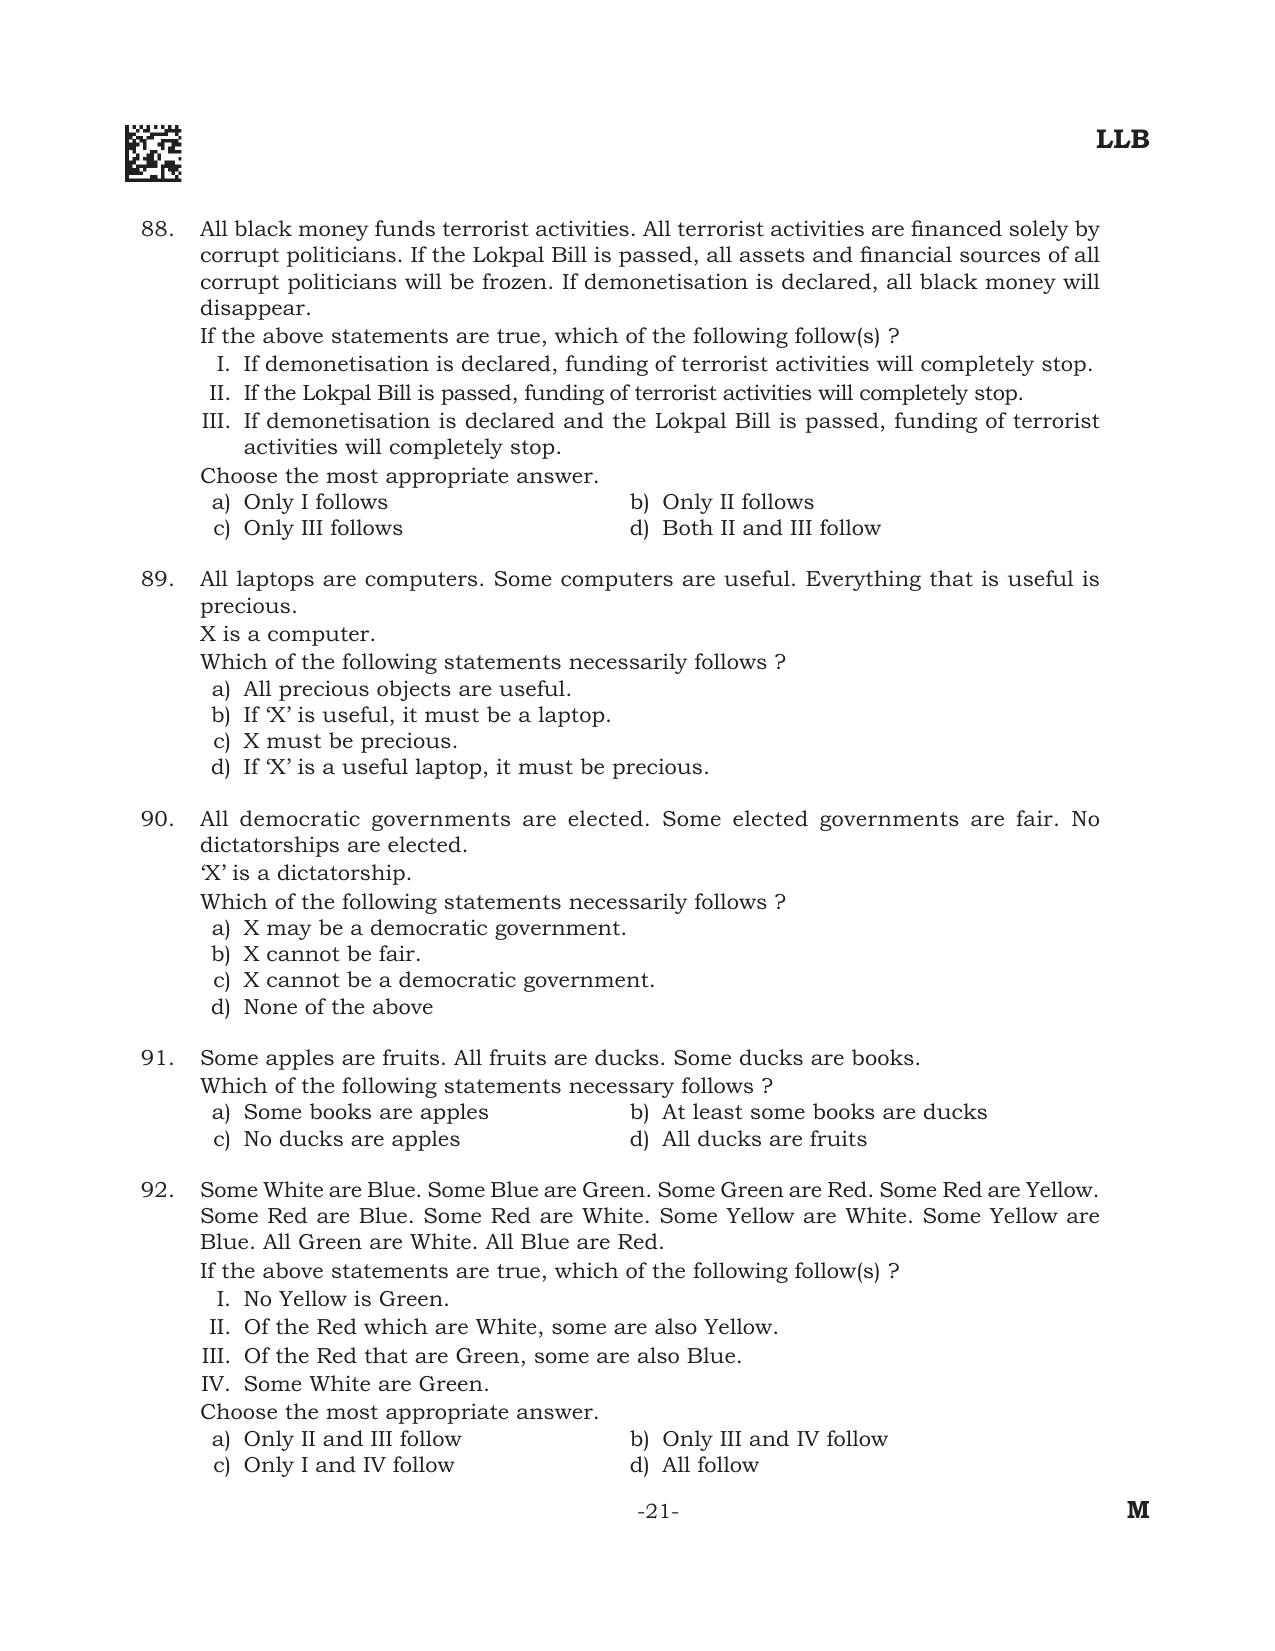 AILET 2022 Question Paper for BA LLB - Page 21